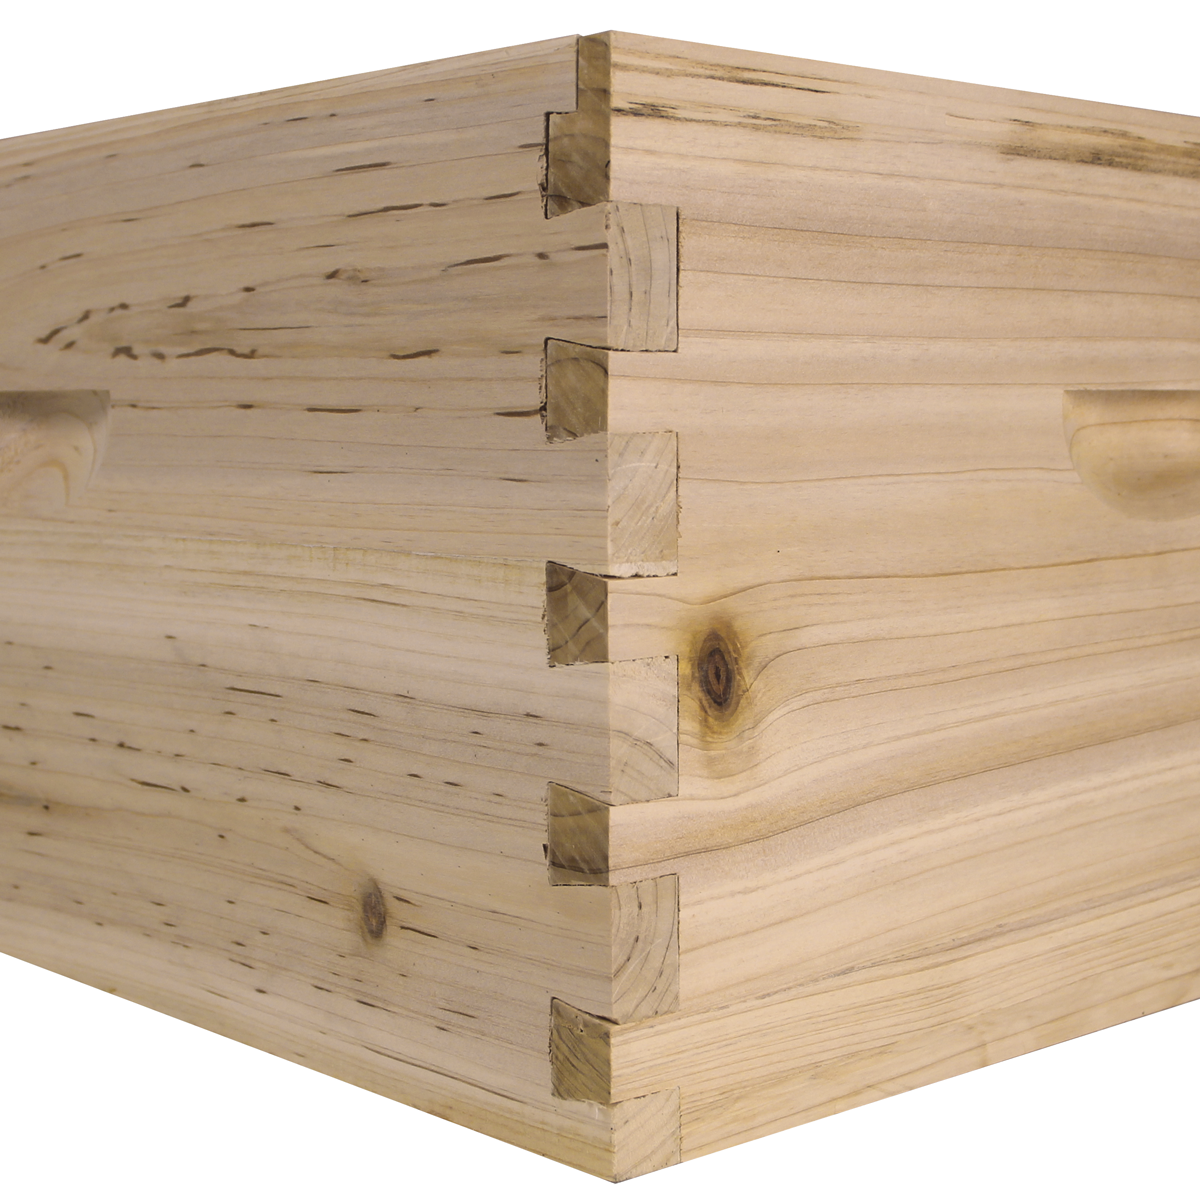 10 Frame Deep Brood Box w/ Dovetail Joints (Unassembled w/ Frames and Foundations)